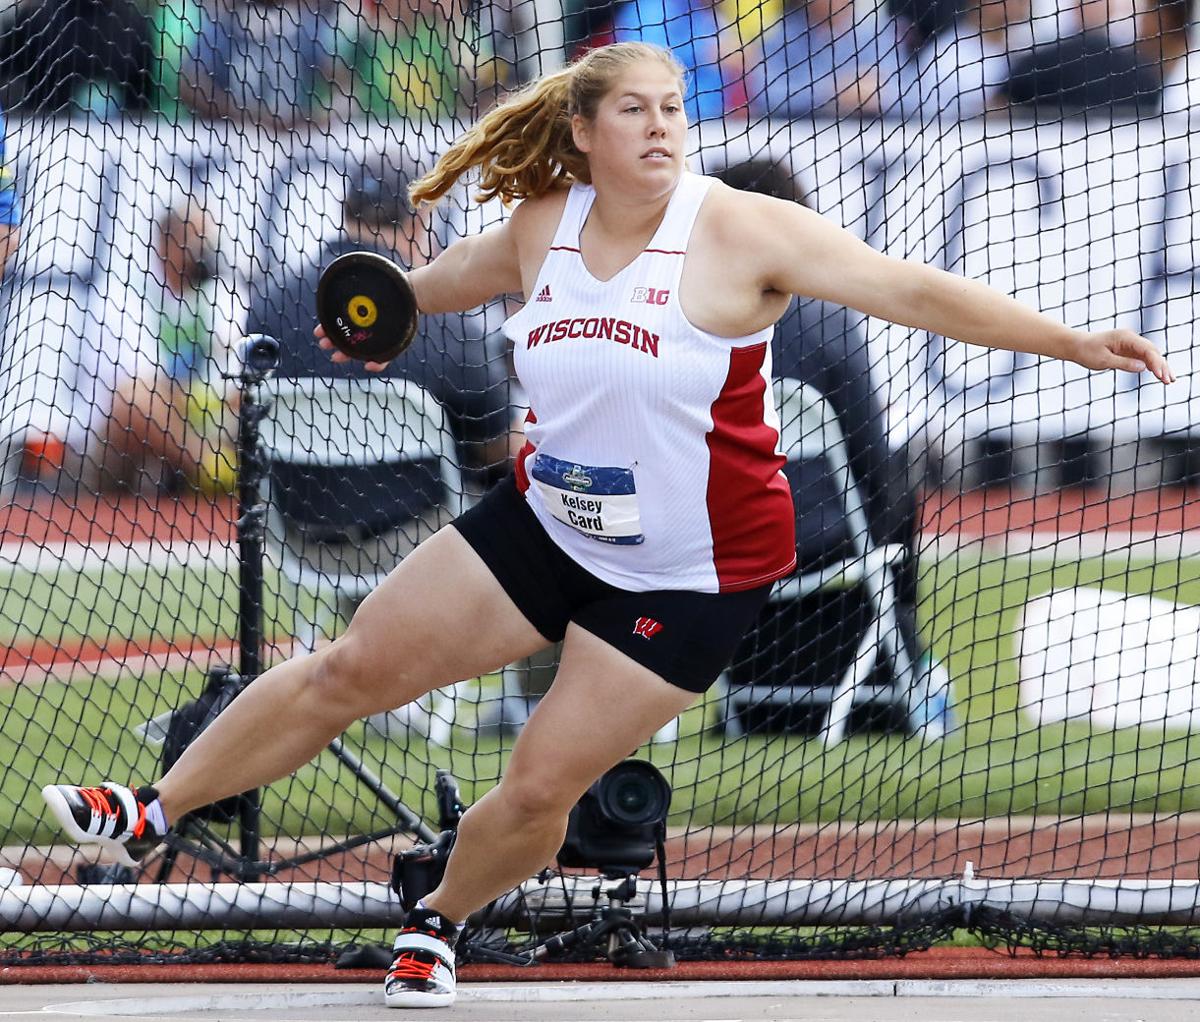 Former Badgers Discus Thrower Kelsey Card Awarded Spot On Us Olympic Team For Tokyo College Sports Madison Com